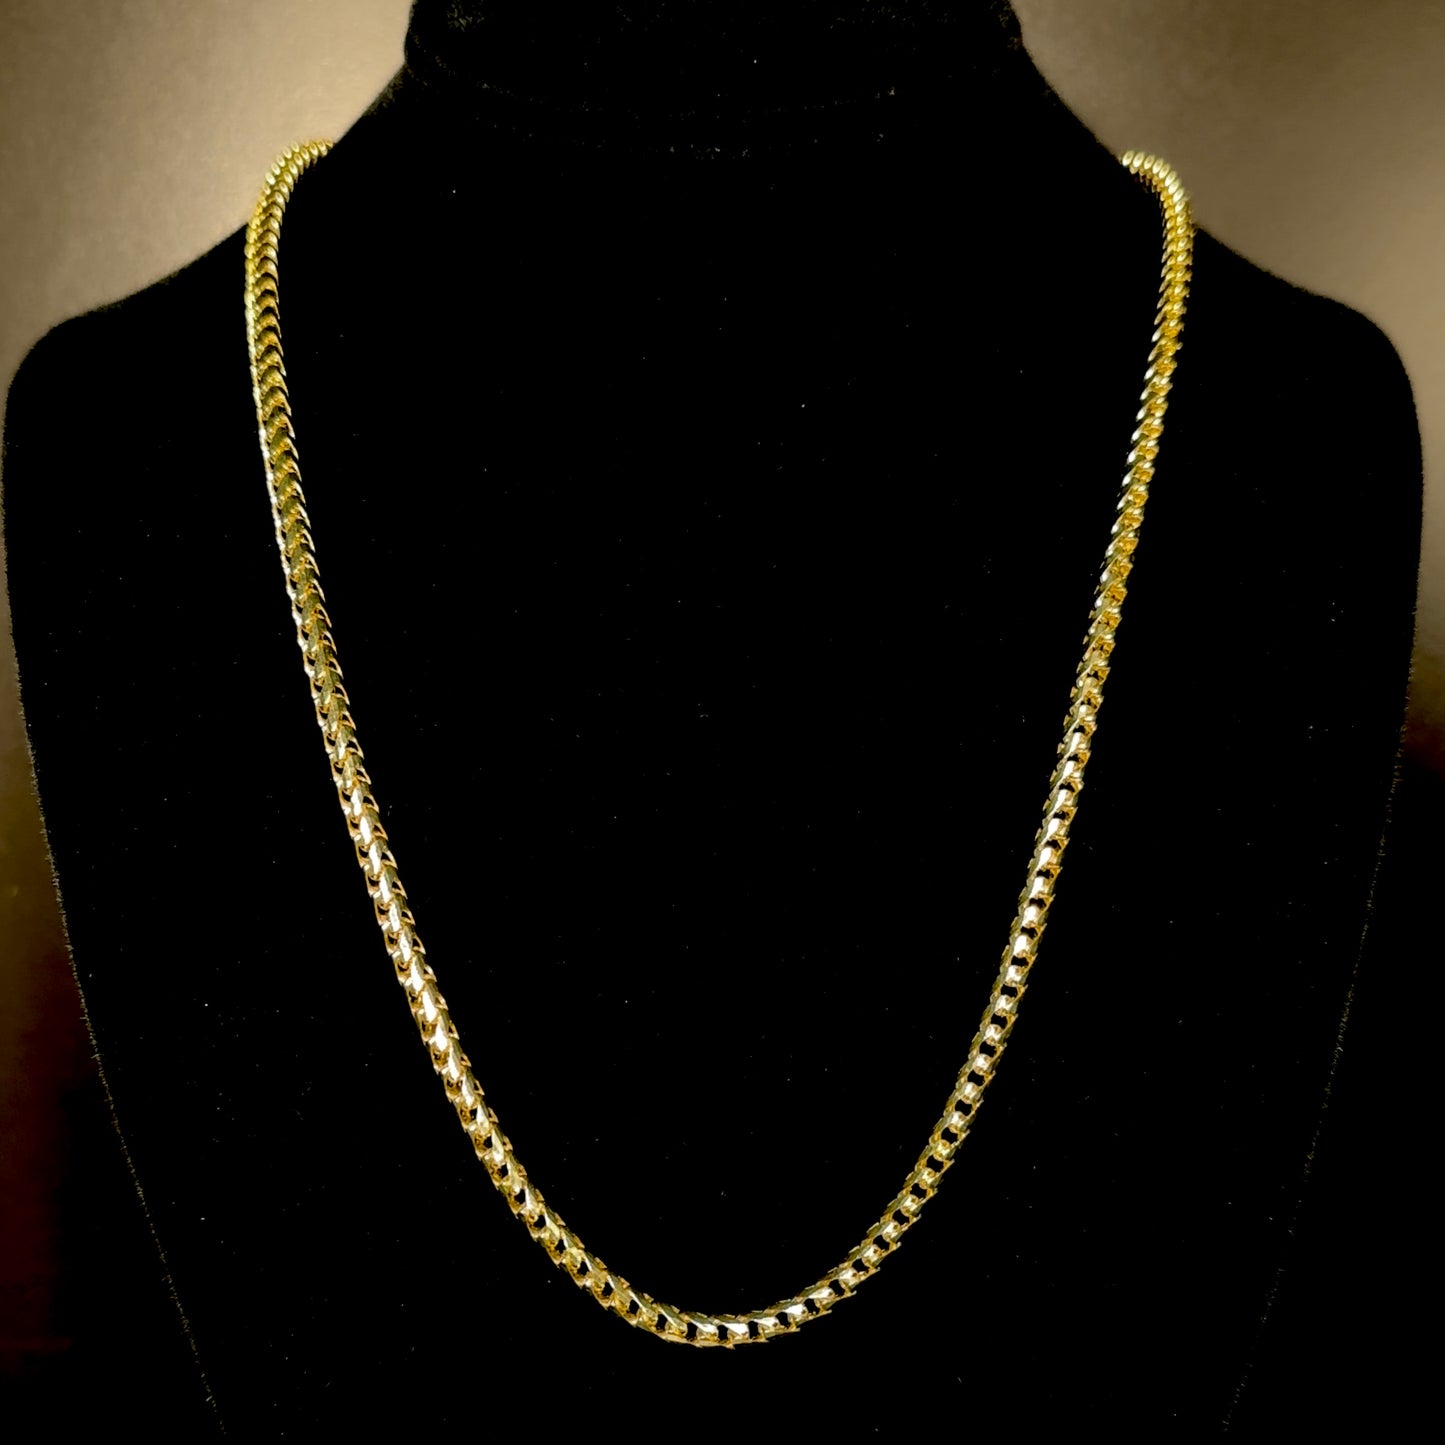 Solid 14k Gold Franco Chain Necklace